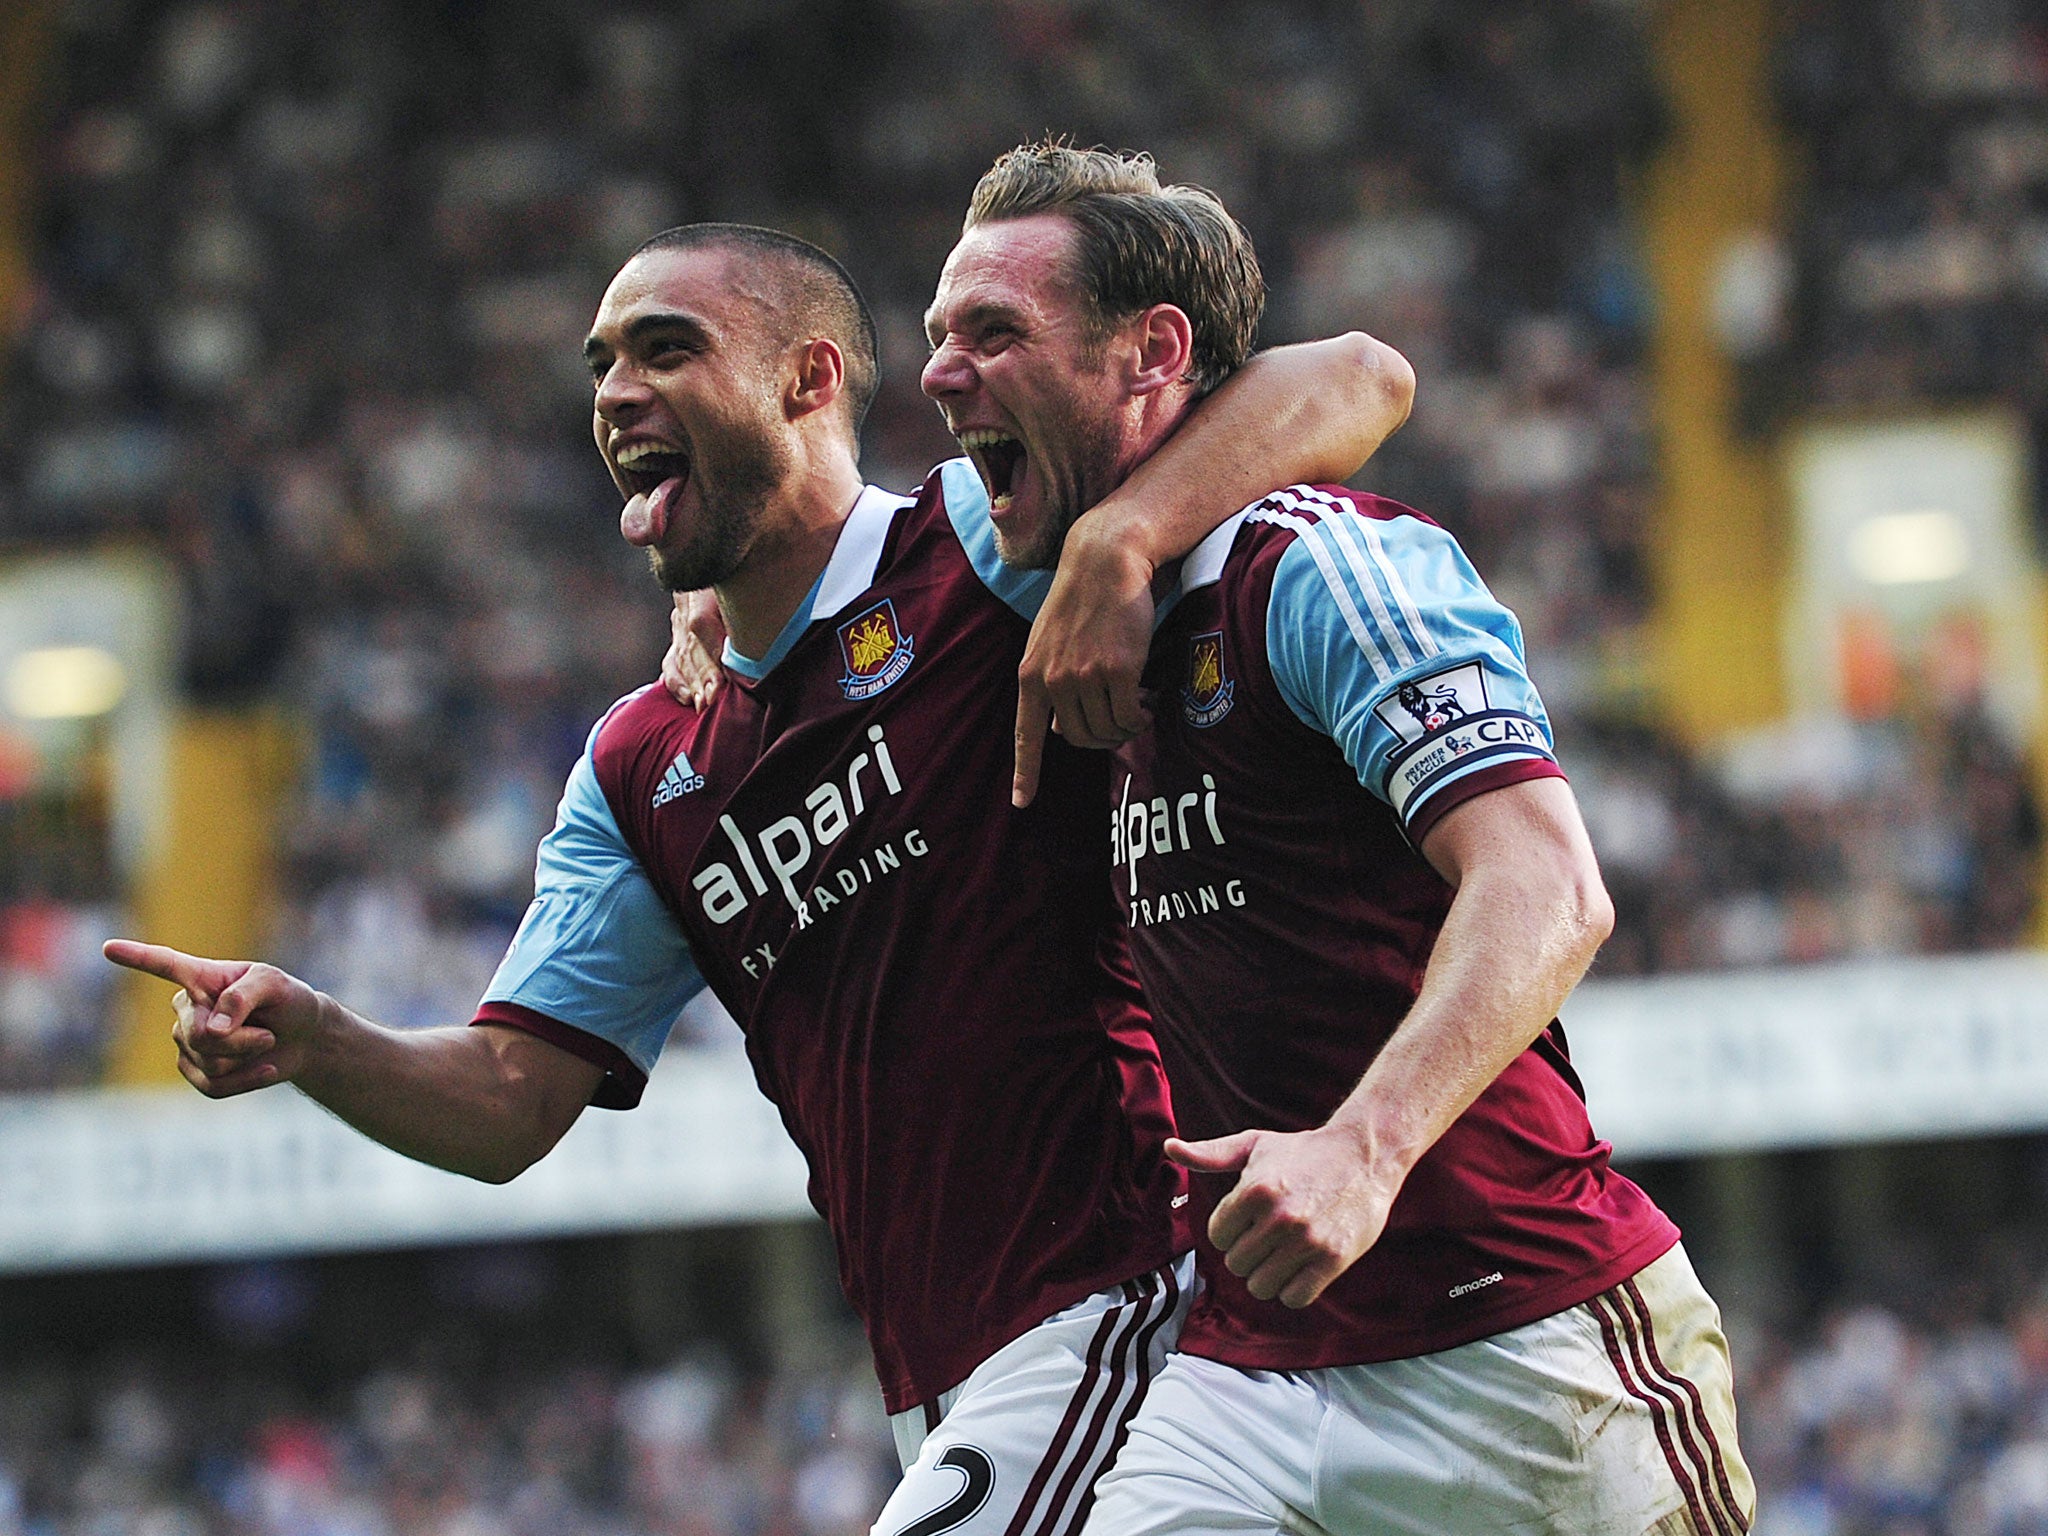 Kevin Nolan has scored two goals in each of his last two Premier League matches